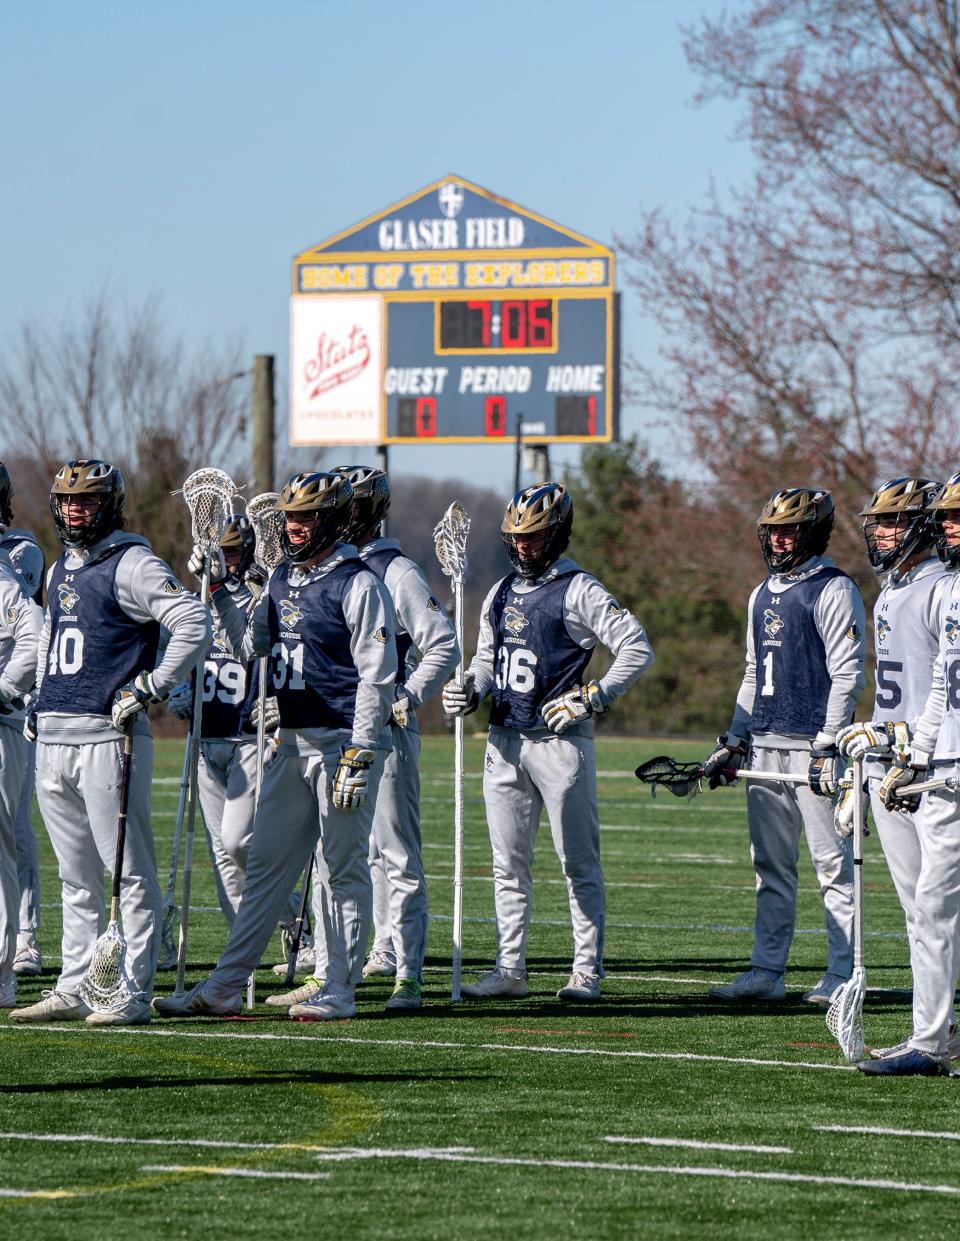 La Salle High's boys' lacrosse team is one of the top teams in the area and the state.